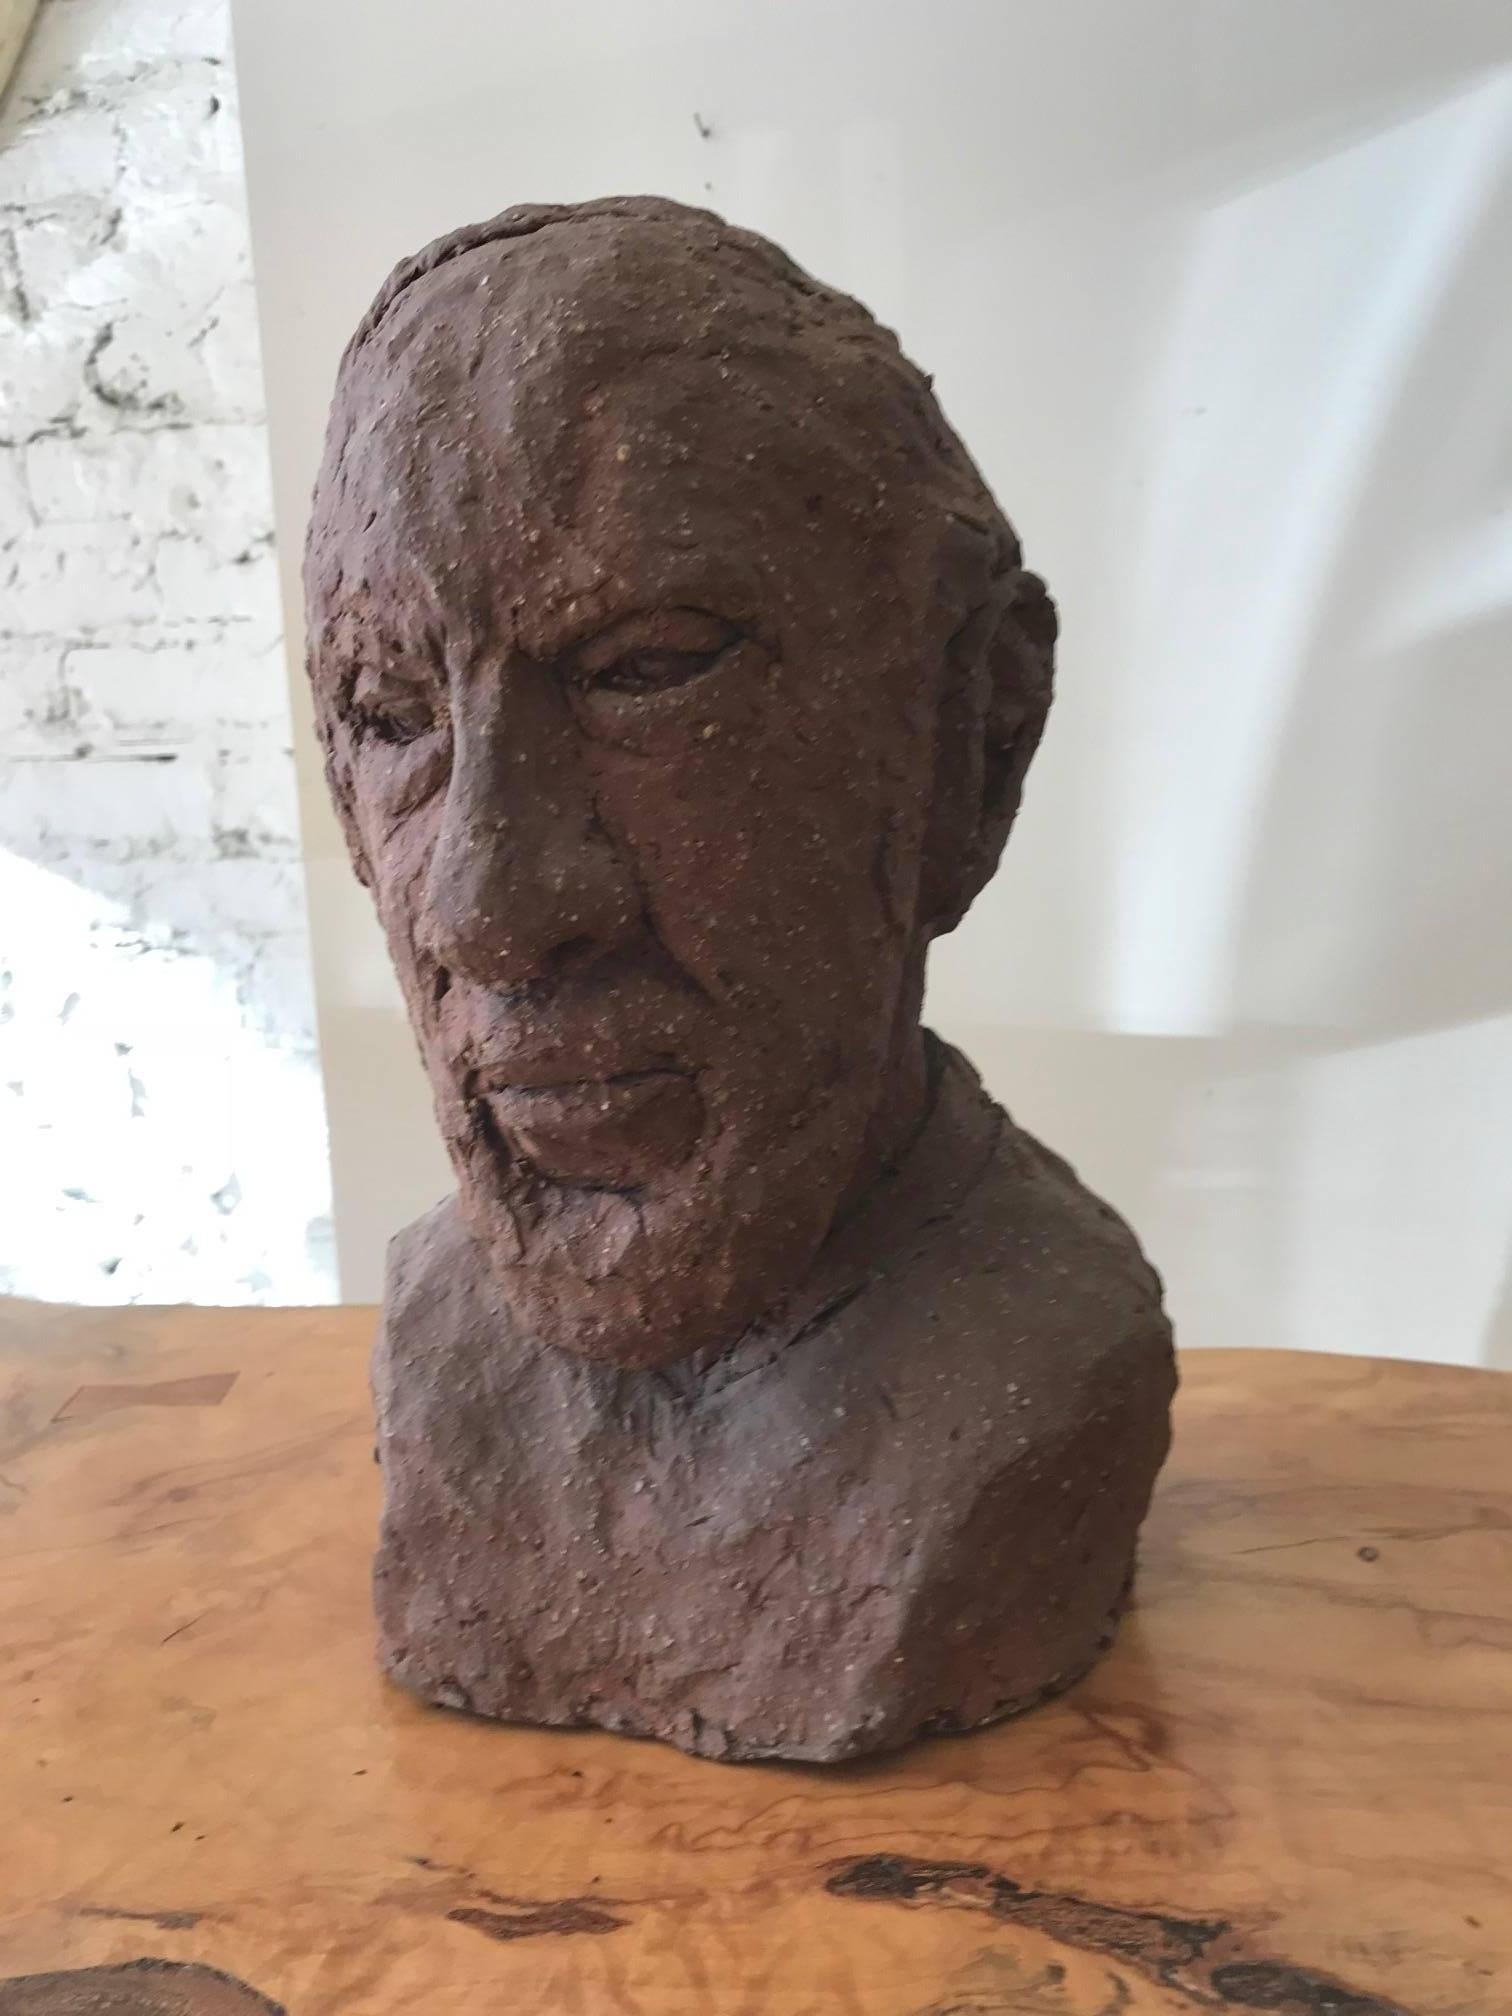 Wonderful rustic unglazed terracotta bust of a man by Joyce Pines a graduate of the Art Institute of Chicago. Pines studied under famed Czech sculptor Albin Polasek.  Intriguing ceramic decorative object from every angle.